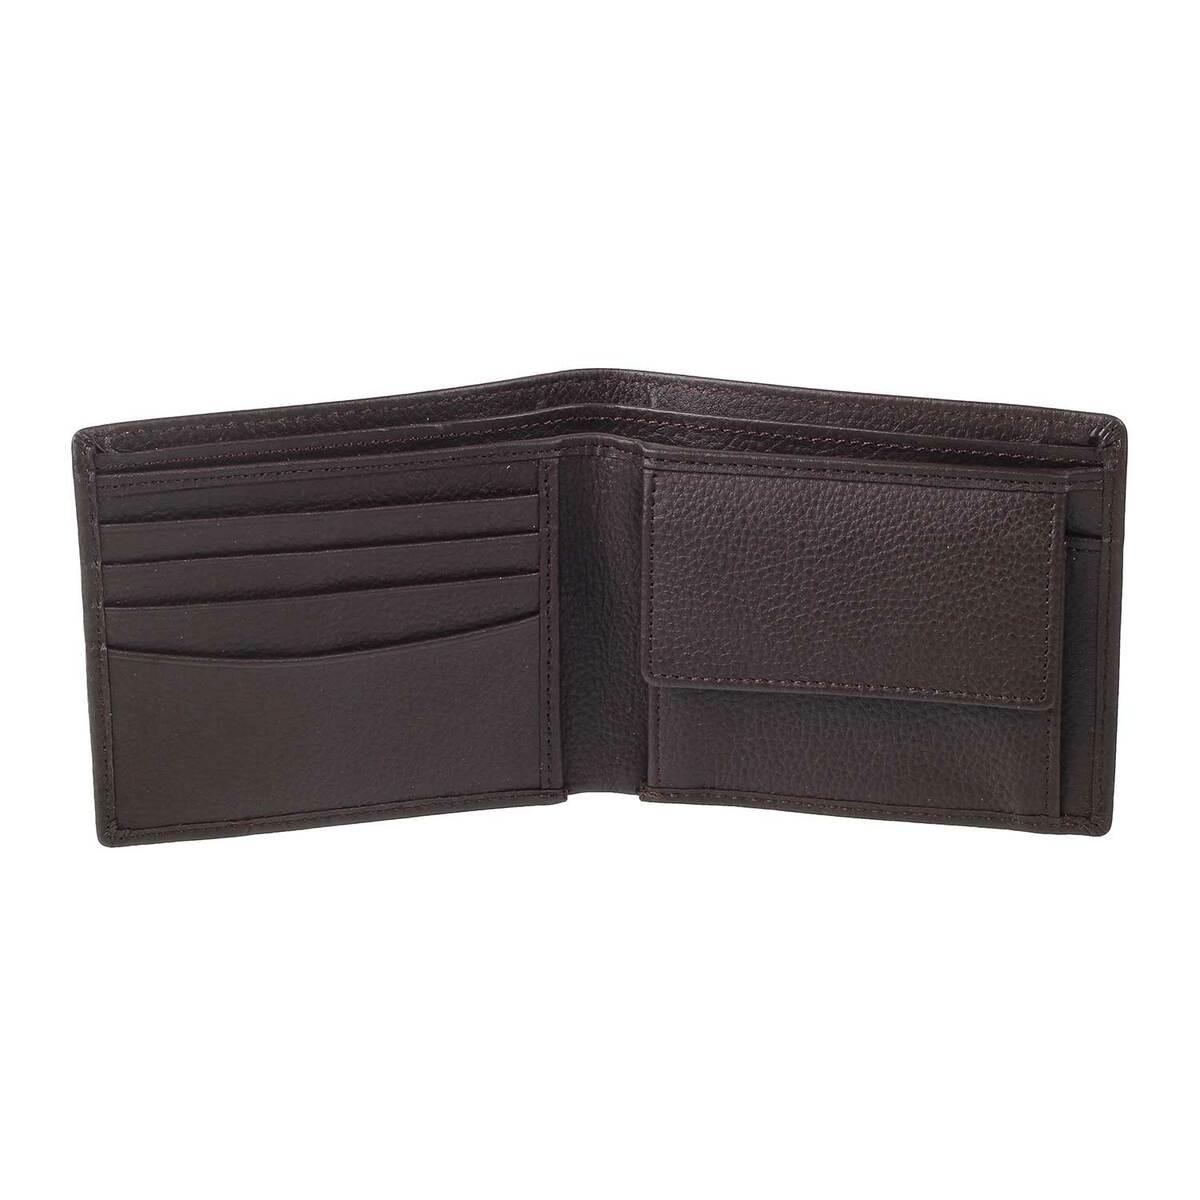 Buy MOCHI Mens Leather Black Trifold (One Size) at Amazon.in